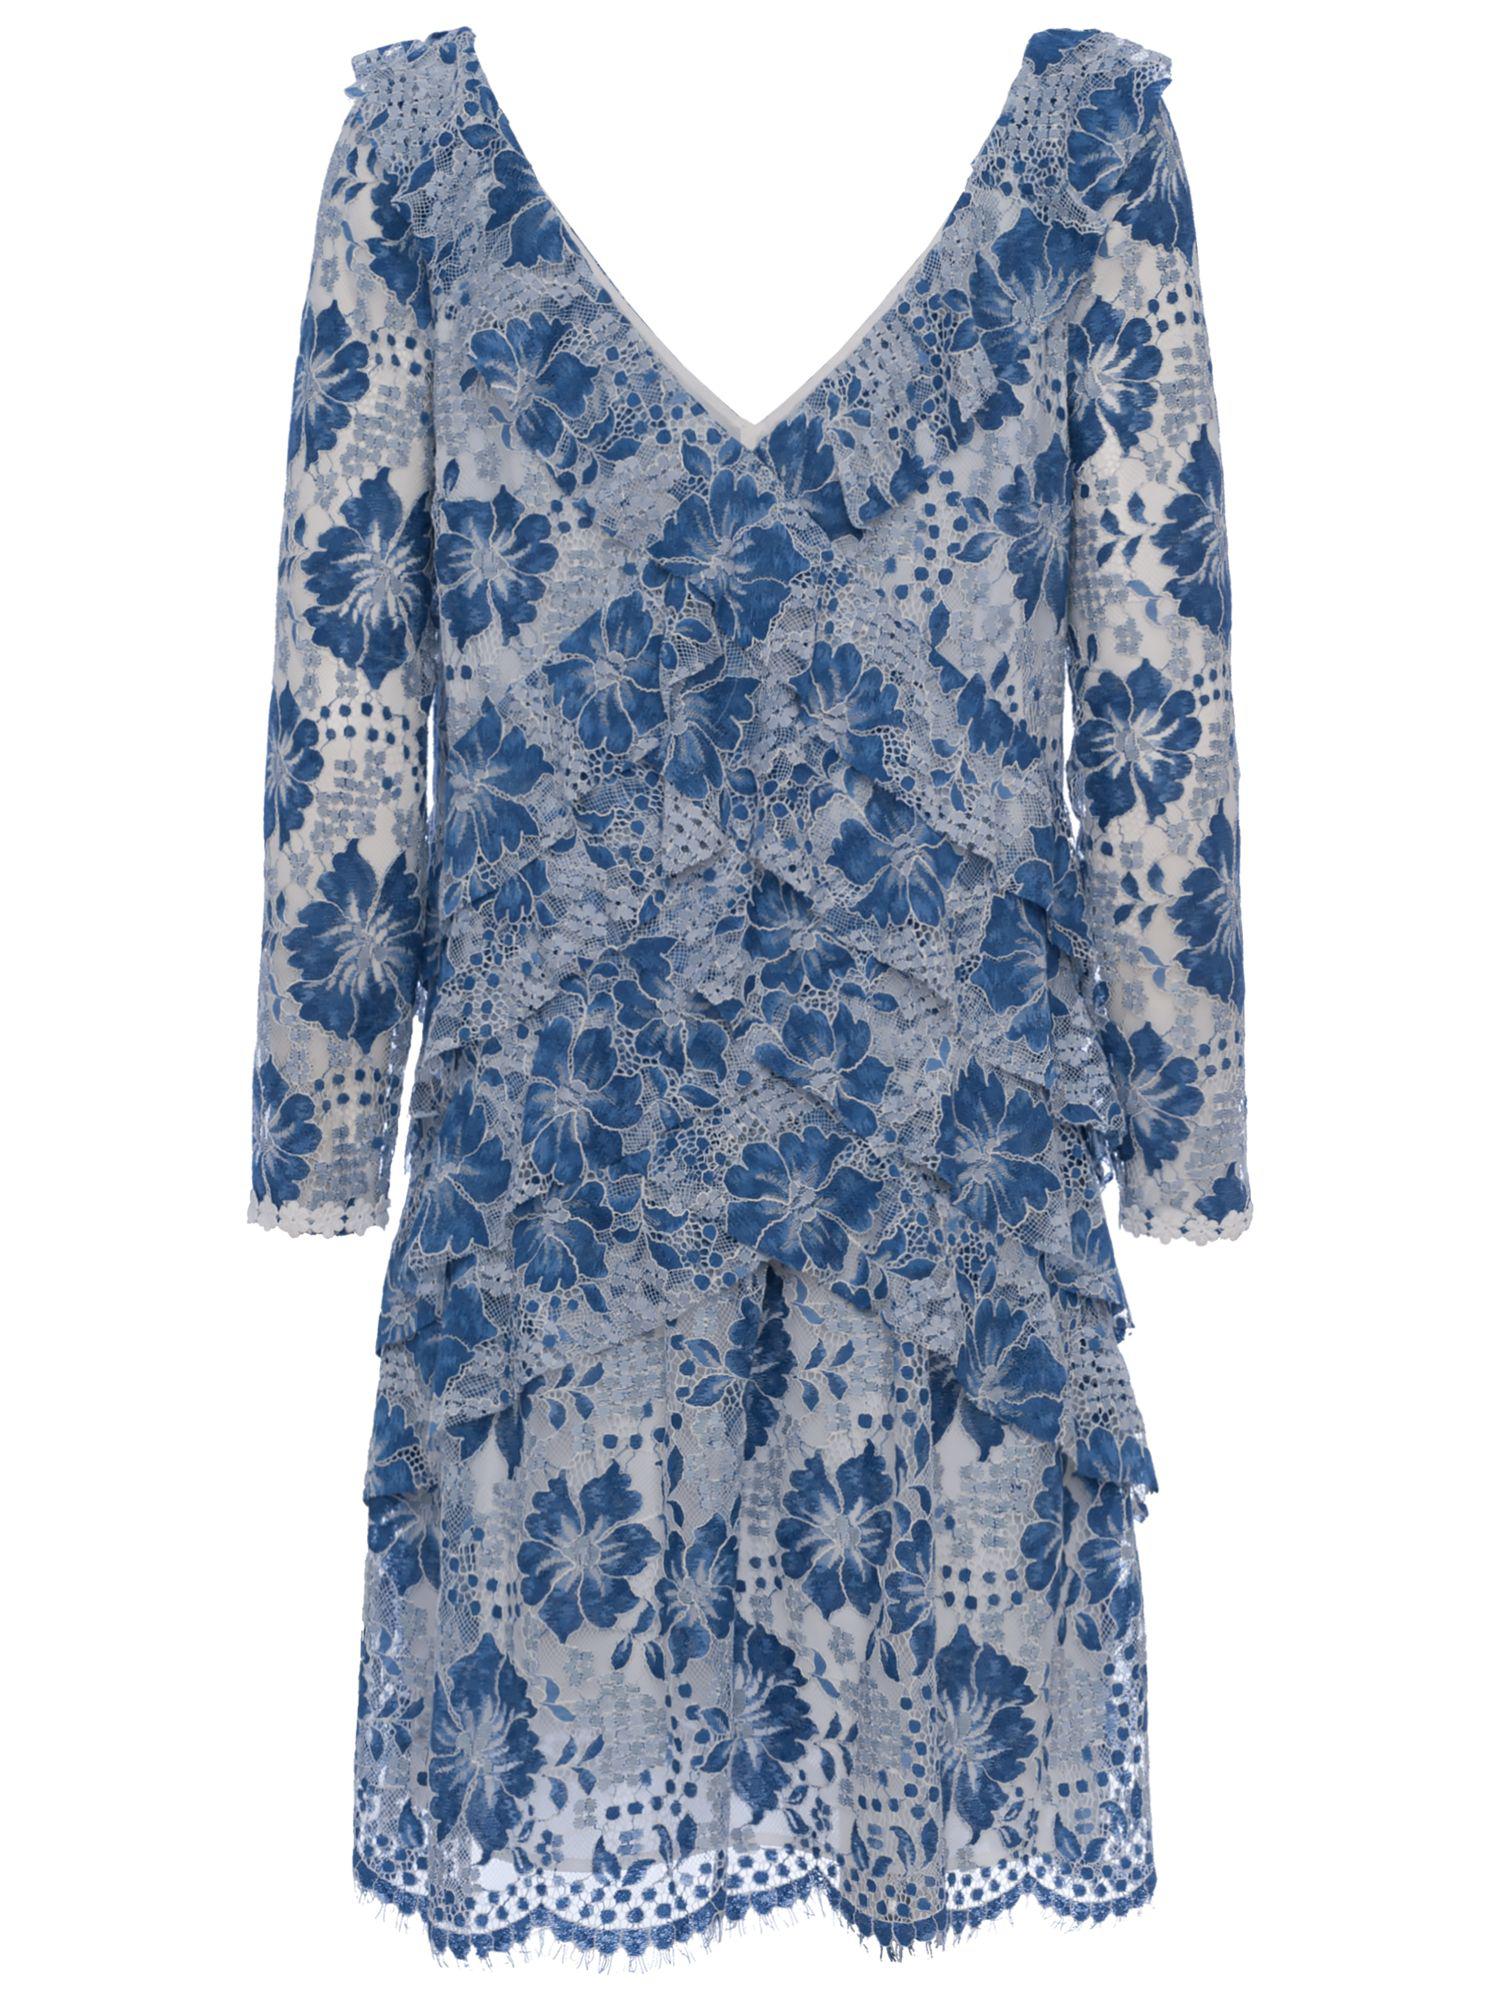 French Connection Antonia Lace Dress in Blue - Lyst